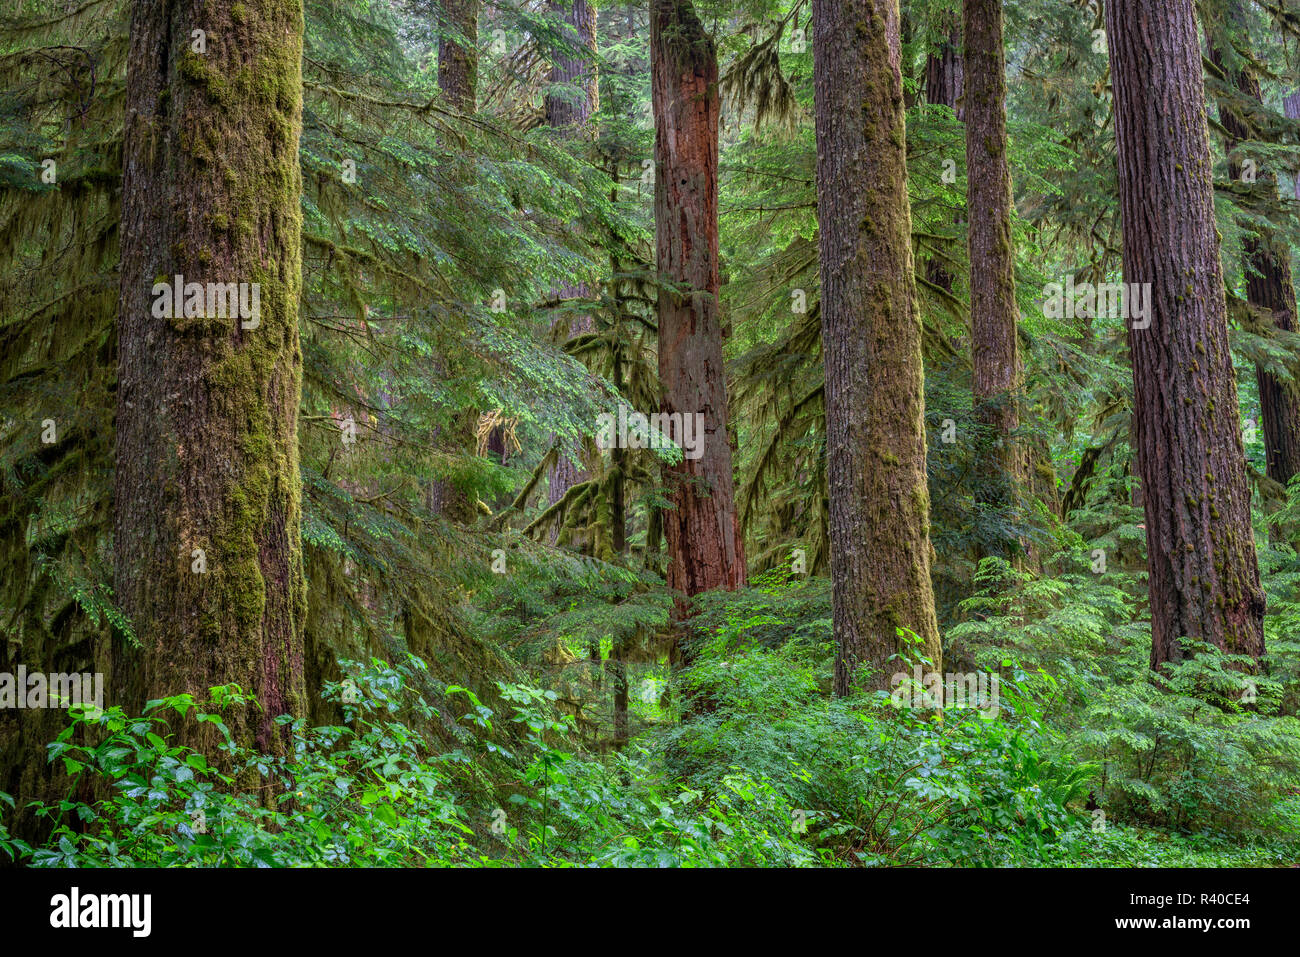 USA, Oregon, Willamette National Forest, Opal Creek Wilderness, Lush, old growth forest with large Douglas fir and western hemlock trees in spring. Stock Photo